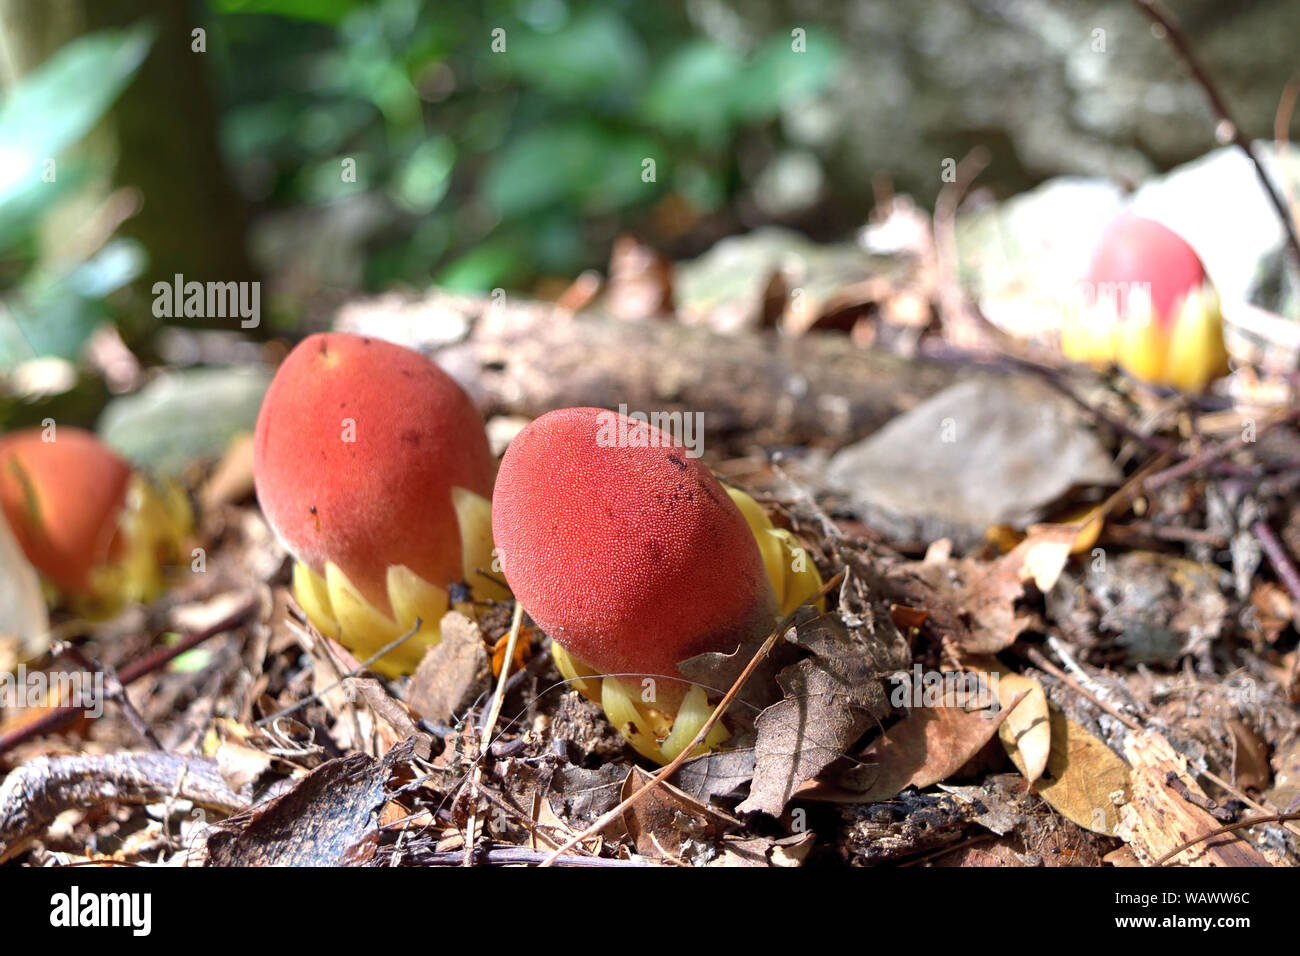 Strange spherical plant resembling a red egg on dirt land full of dry leaf, Sapling of Balanophora fungosa or Nutmeg tree in forest Stock Photo